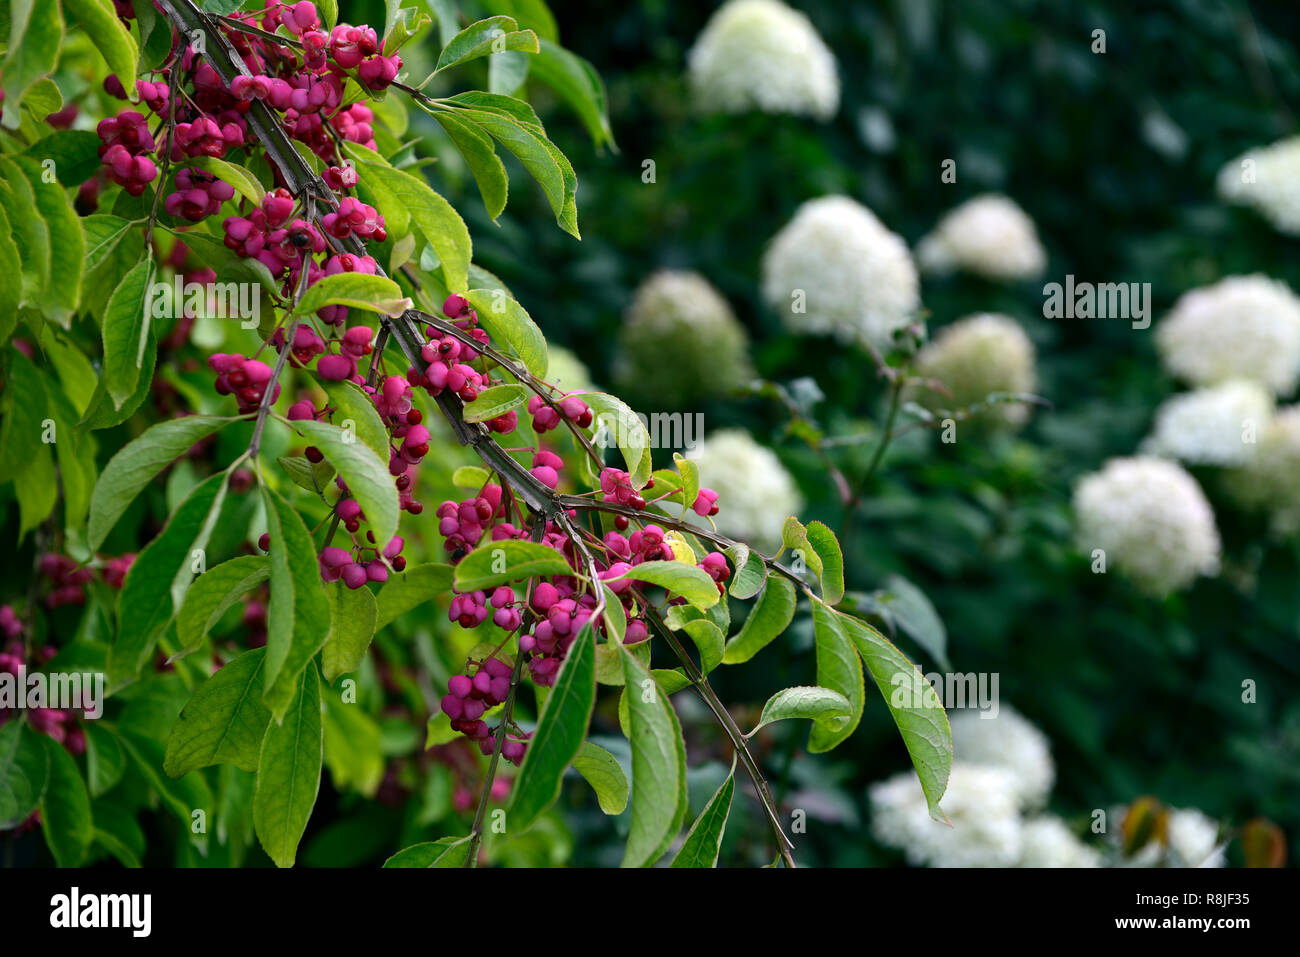 Euonymus phellomanus,spindle tree,red,pink,fruit,fruits,4 lobed,lobed,berry,berries,unusual,trees,shrub,shrubs,garden,autumn interest,RM Floral Stock Photo